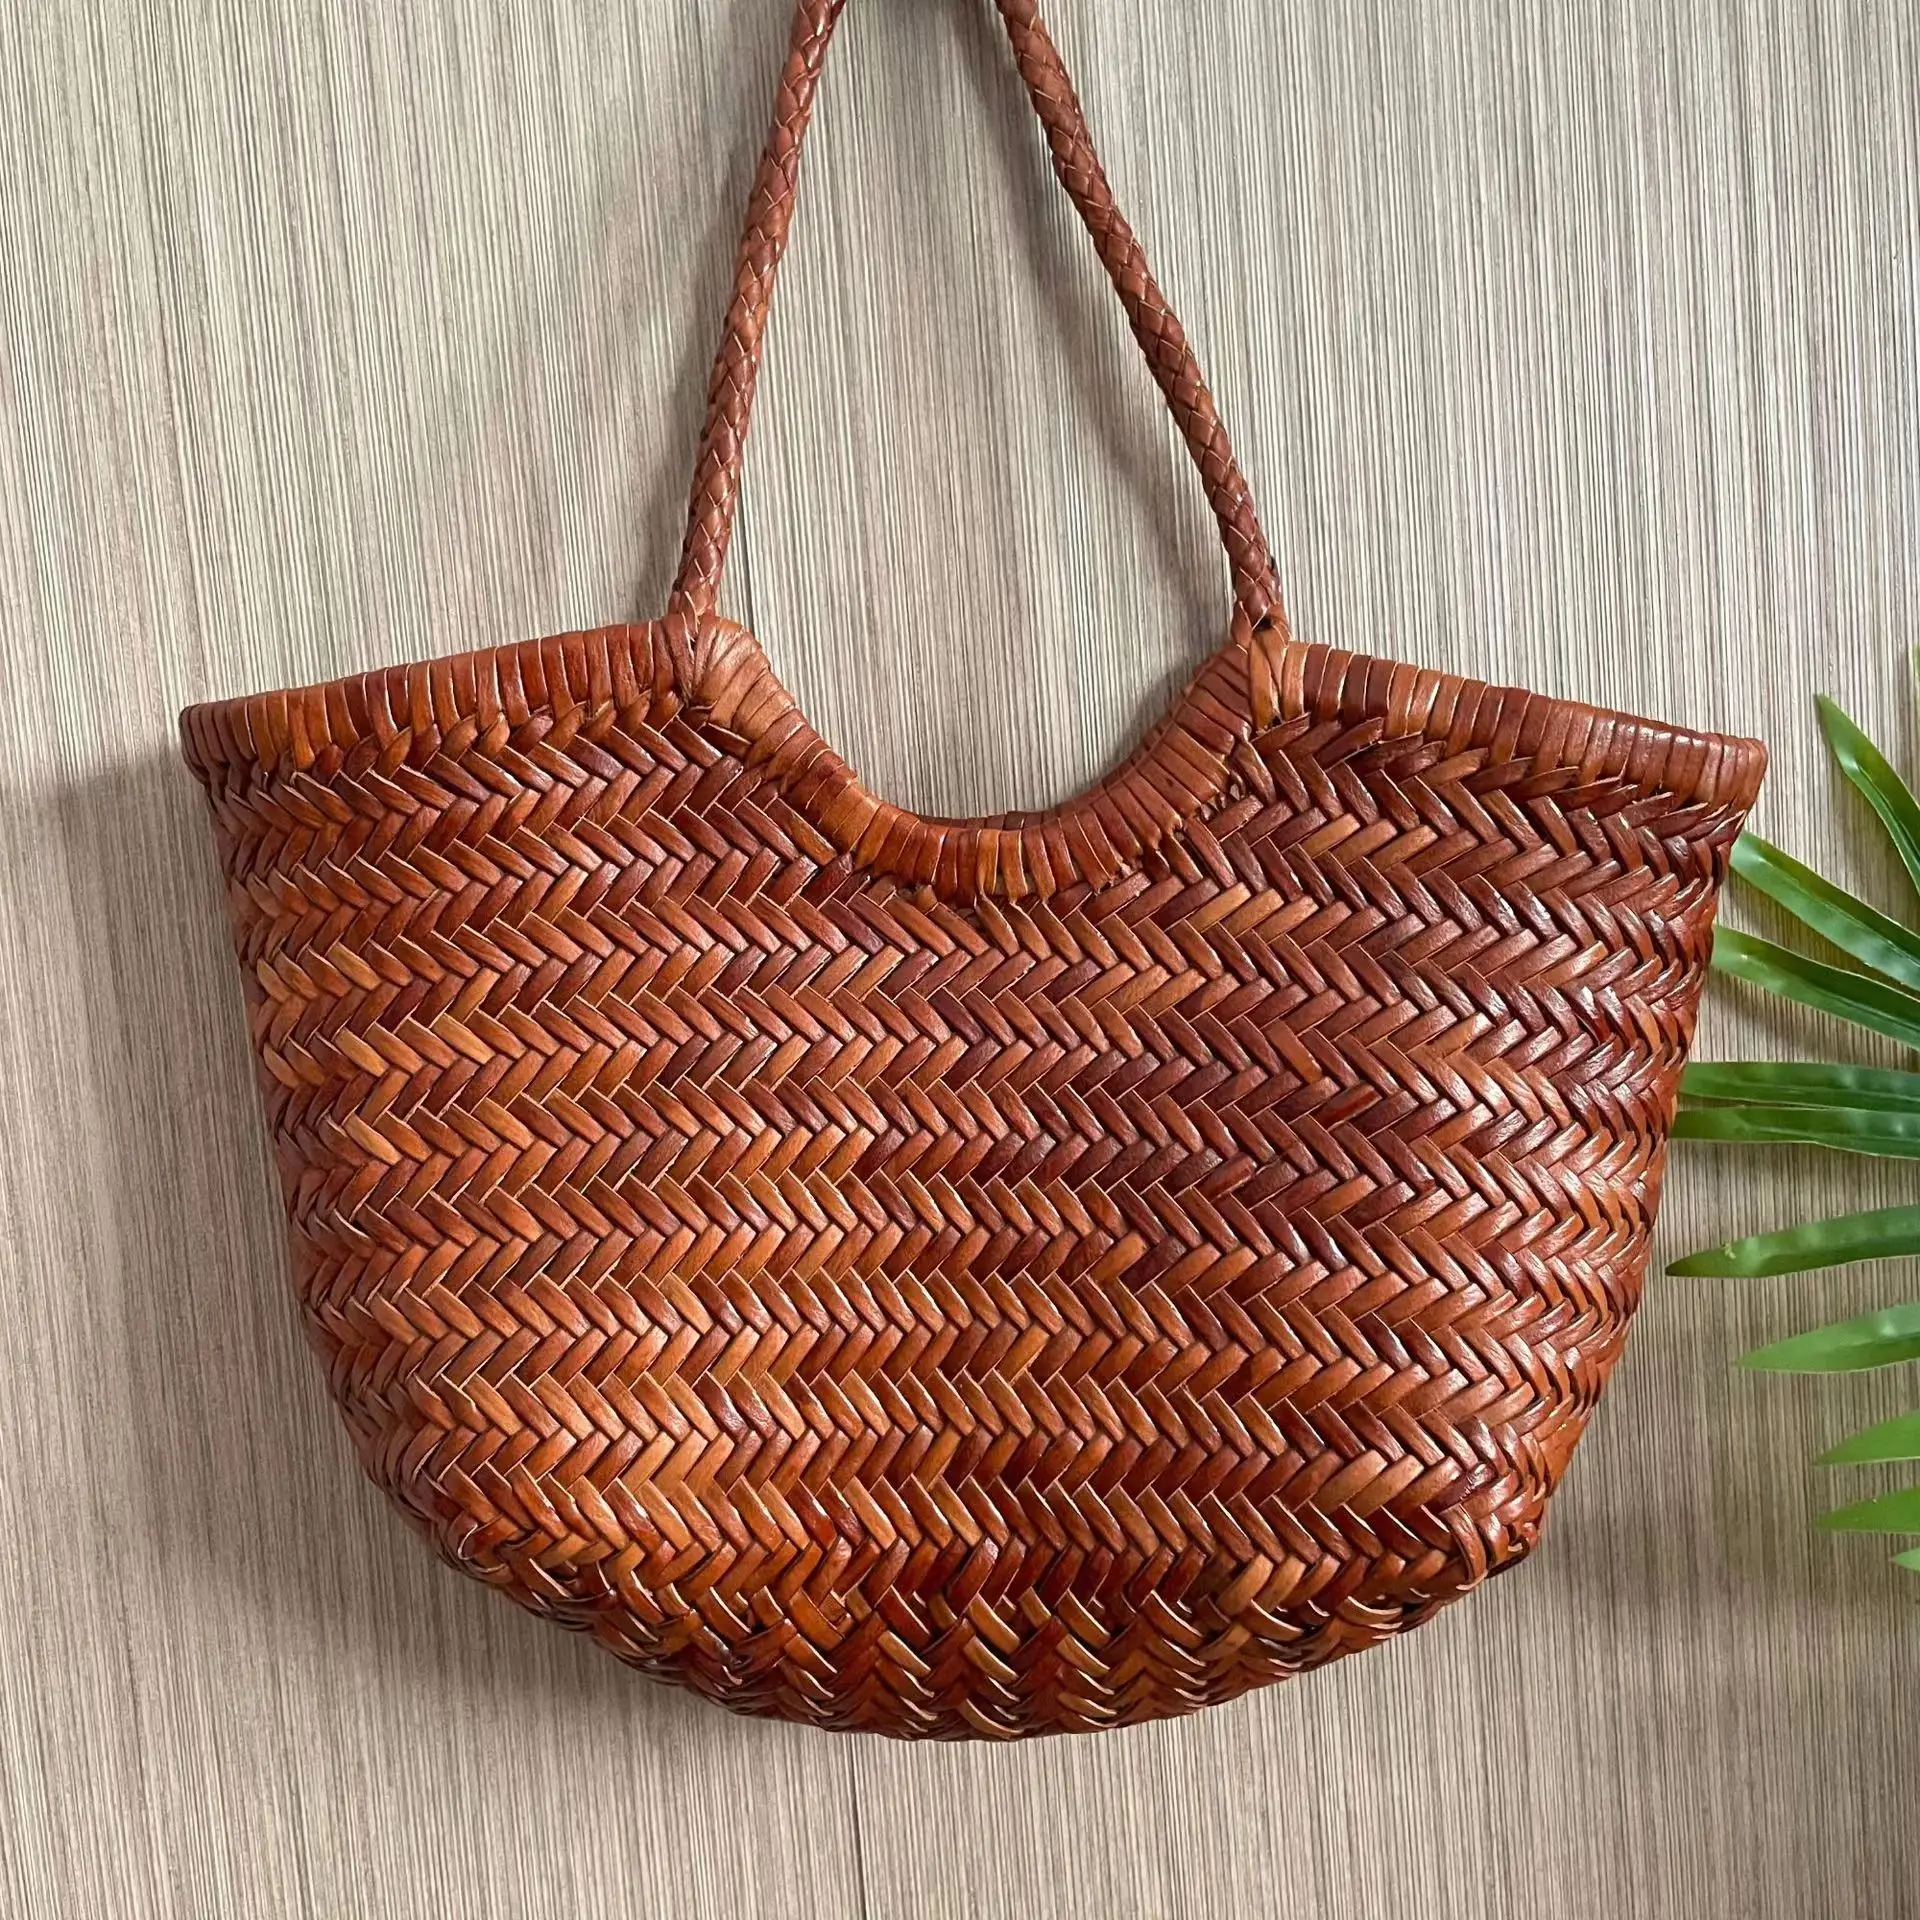 

Hand woven basket 100% Genuine Leather Woven Cow Leather Shoulder Bag Woven Inside Bag Vintage Shopping Bag Cowhide Tote